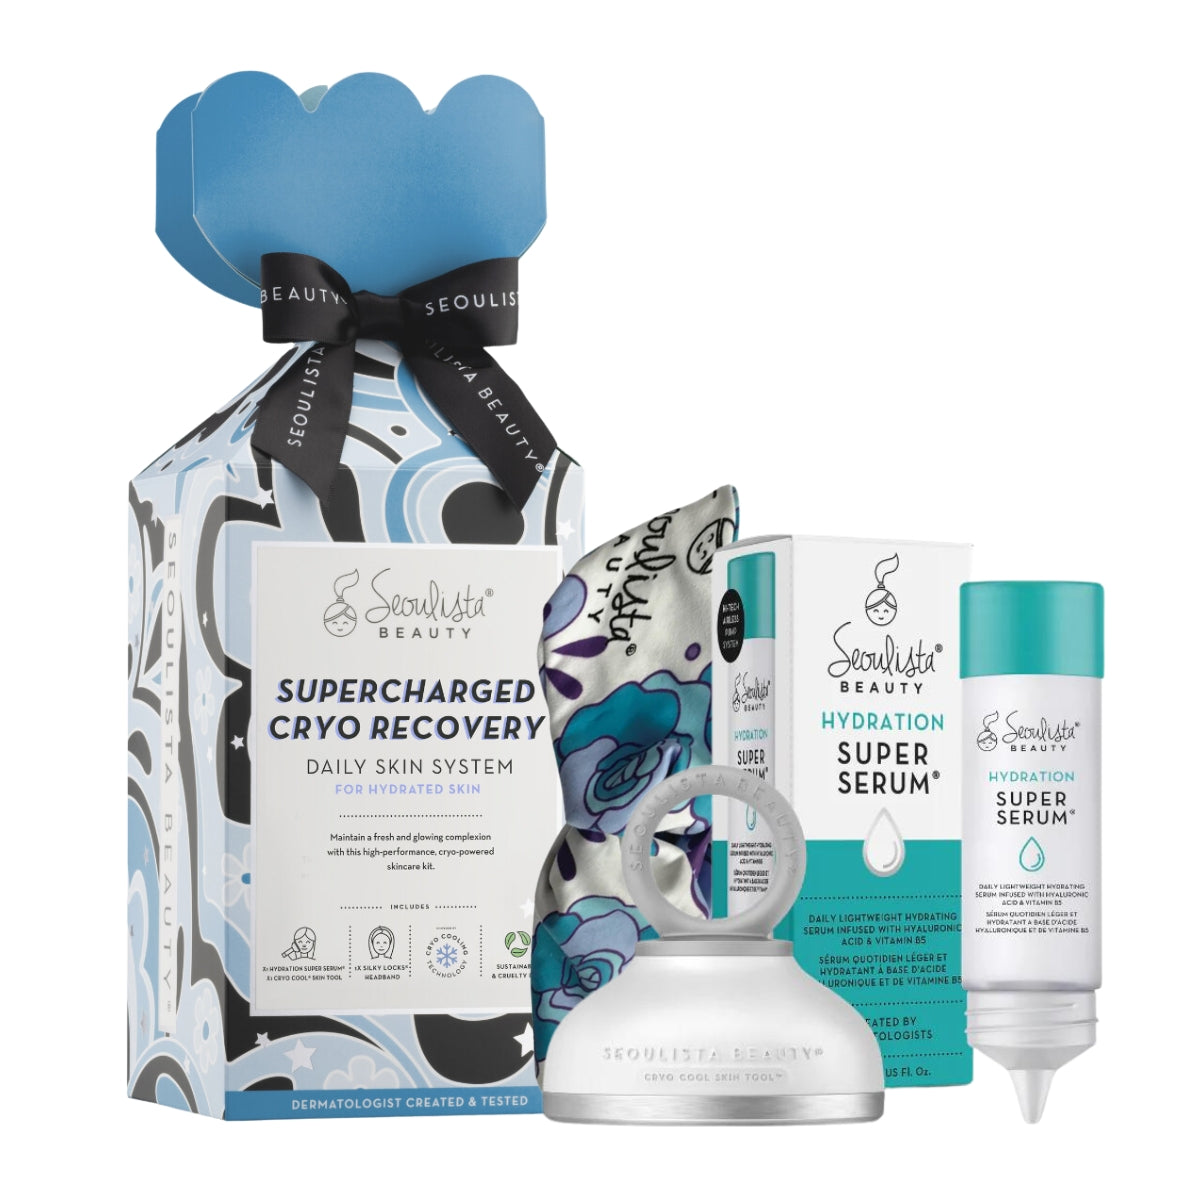 Seoulista Supercharged Cryo Recovery Gift Set